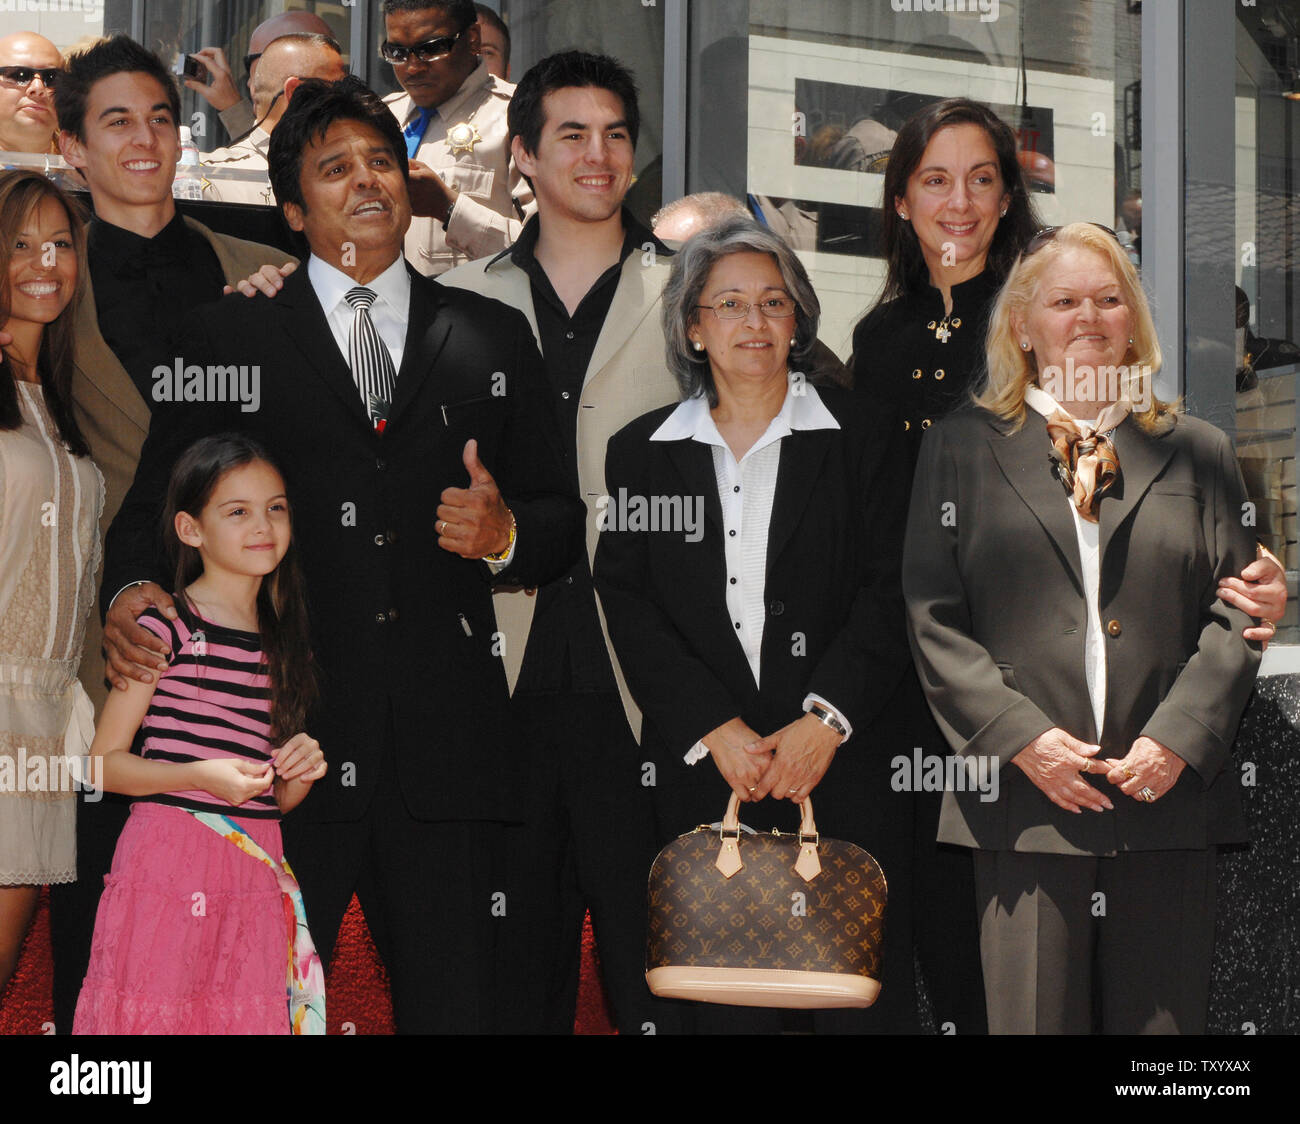 Actor Erik Estrada (2nd-L), best known for his role as Officer Frank 'Ponch' Poncherello in the 1977-1983 television series 'CHiPS' poses with young daughter Francesca, his mother Carmen and wife Nanette (R) along with other unidentified family members after his star was unveiled on the Hollywood Walk of Fame in Los Angeles on April 19, 2007. (UPI Photo/Jim Ruymen) Stock Photo